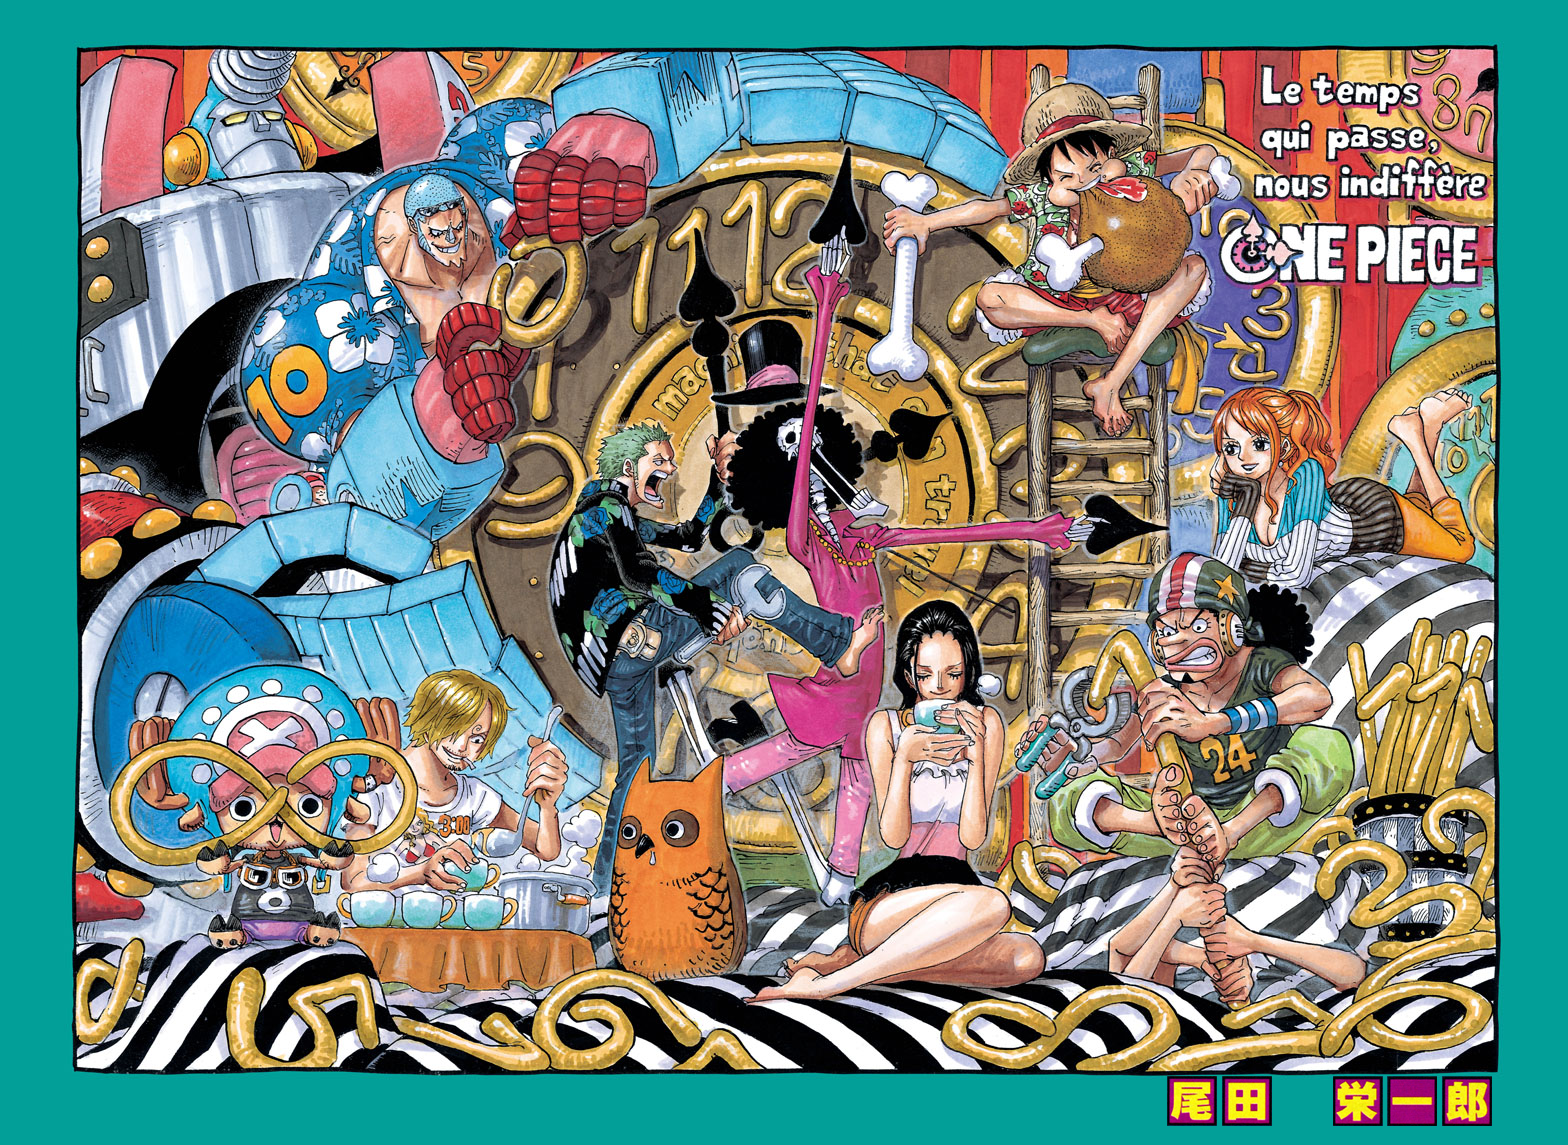 One Piece Cover Art - One Piece New Cover By Naruke24 On Deviantart